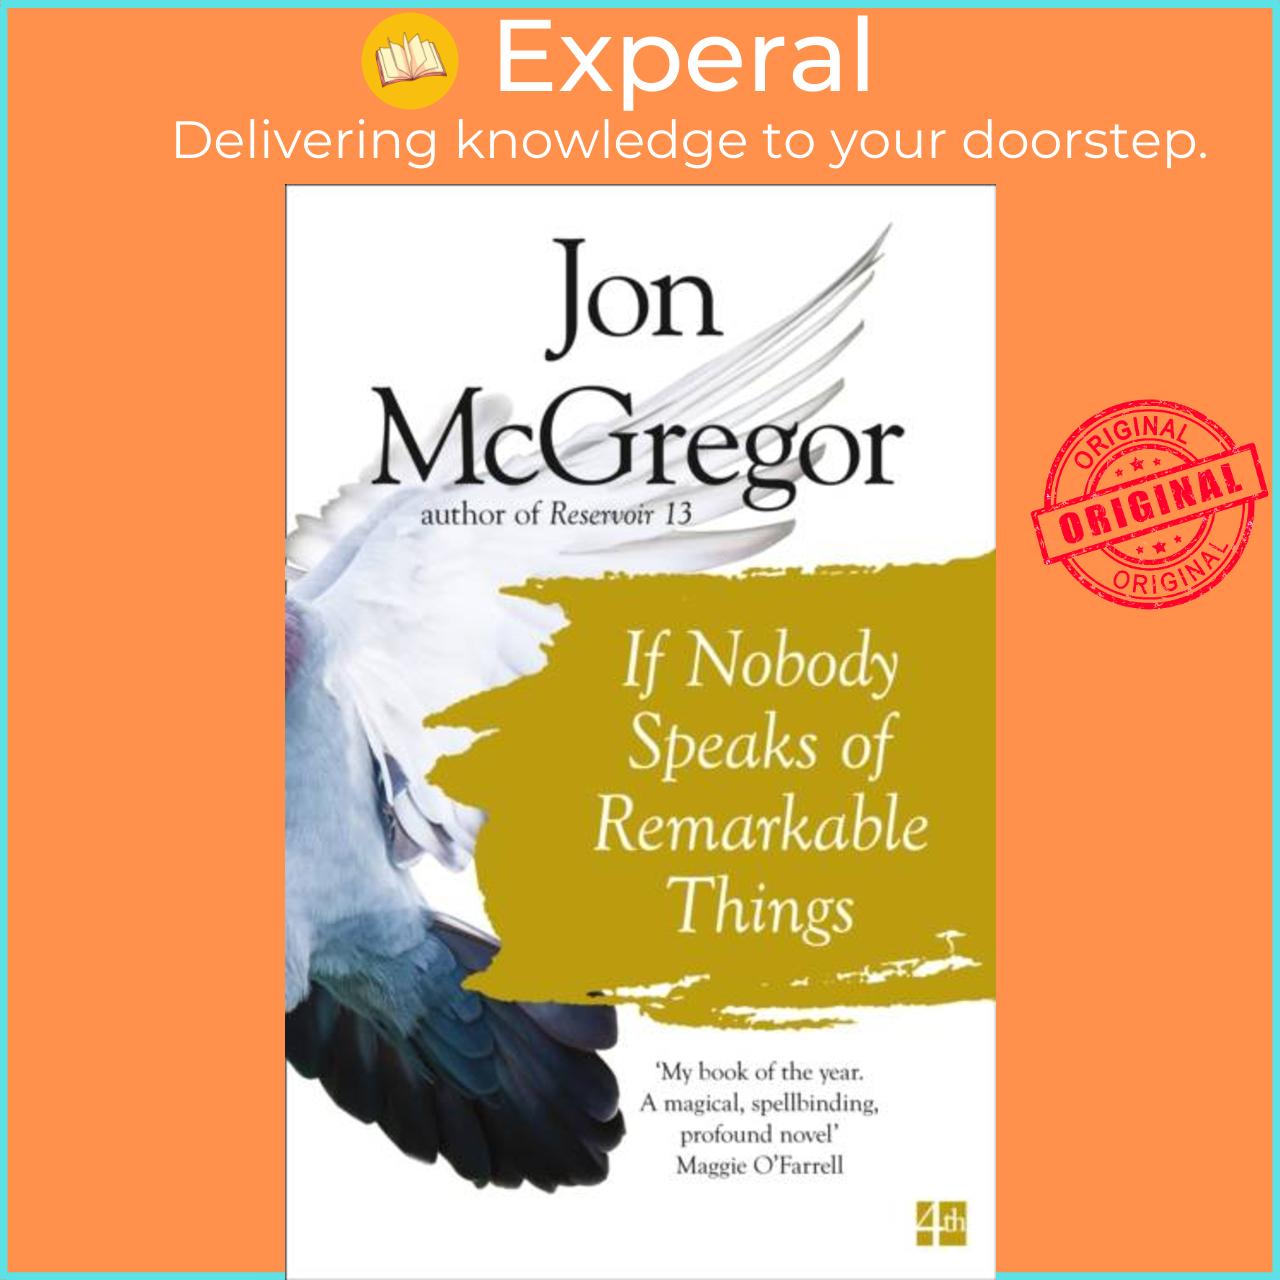 Sách - If Nobody Speaks of Remarkable Things by Jon McGregor (UK edition, paperback)